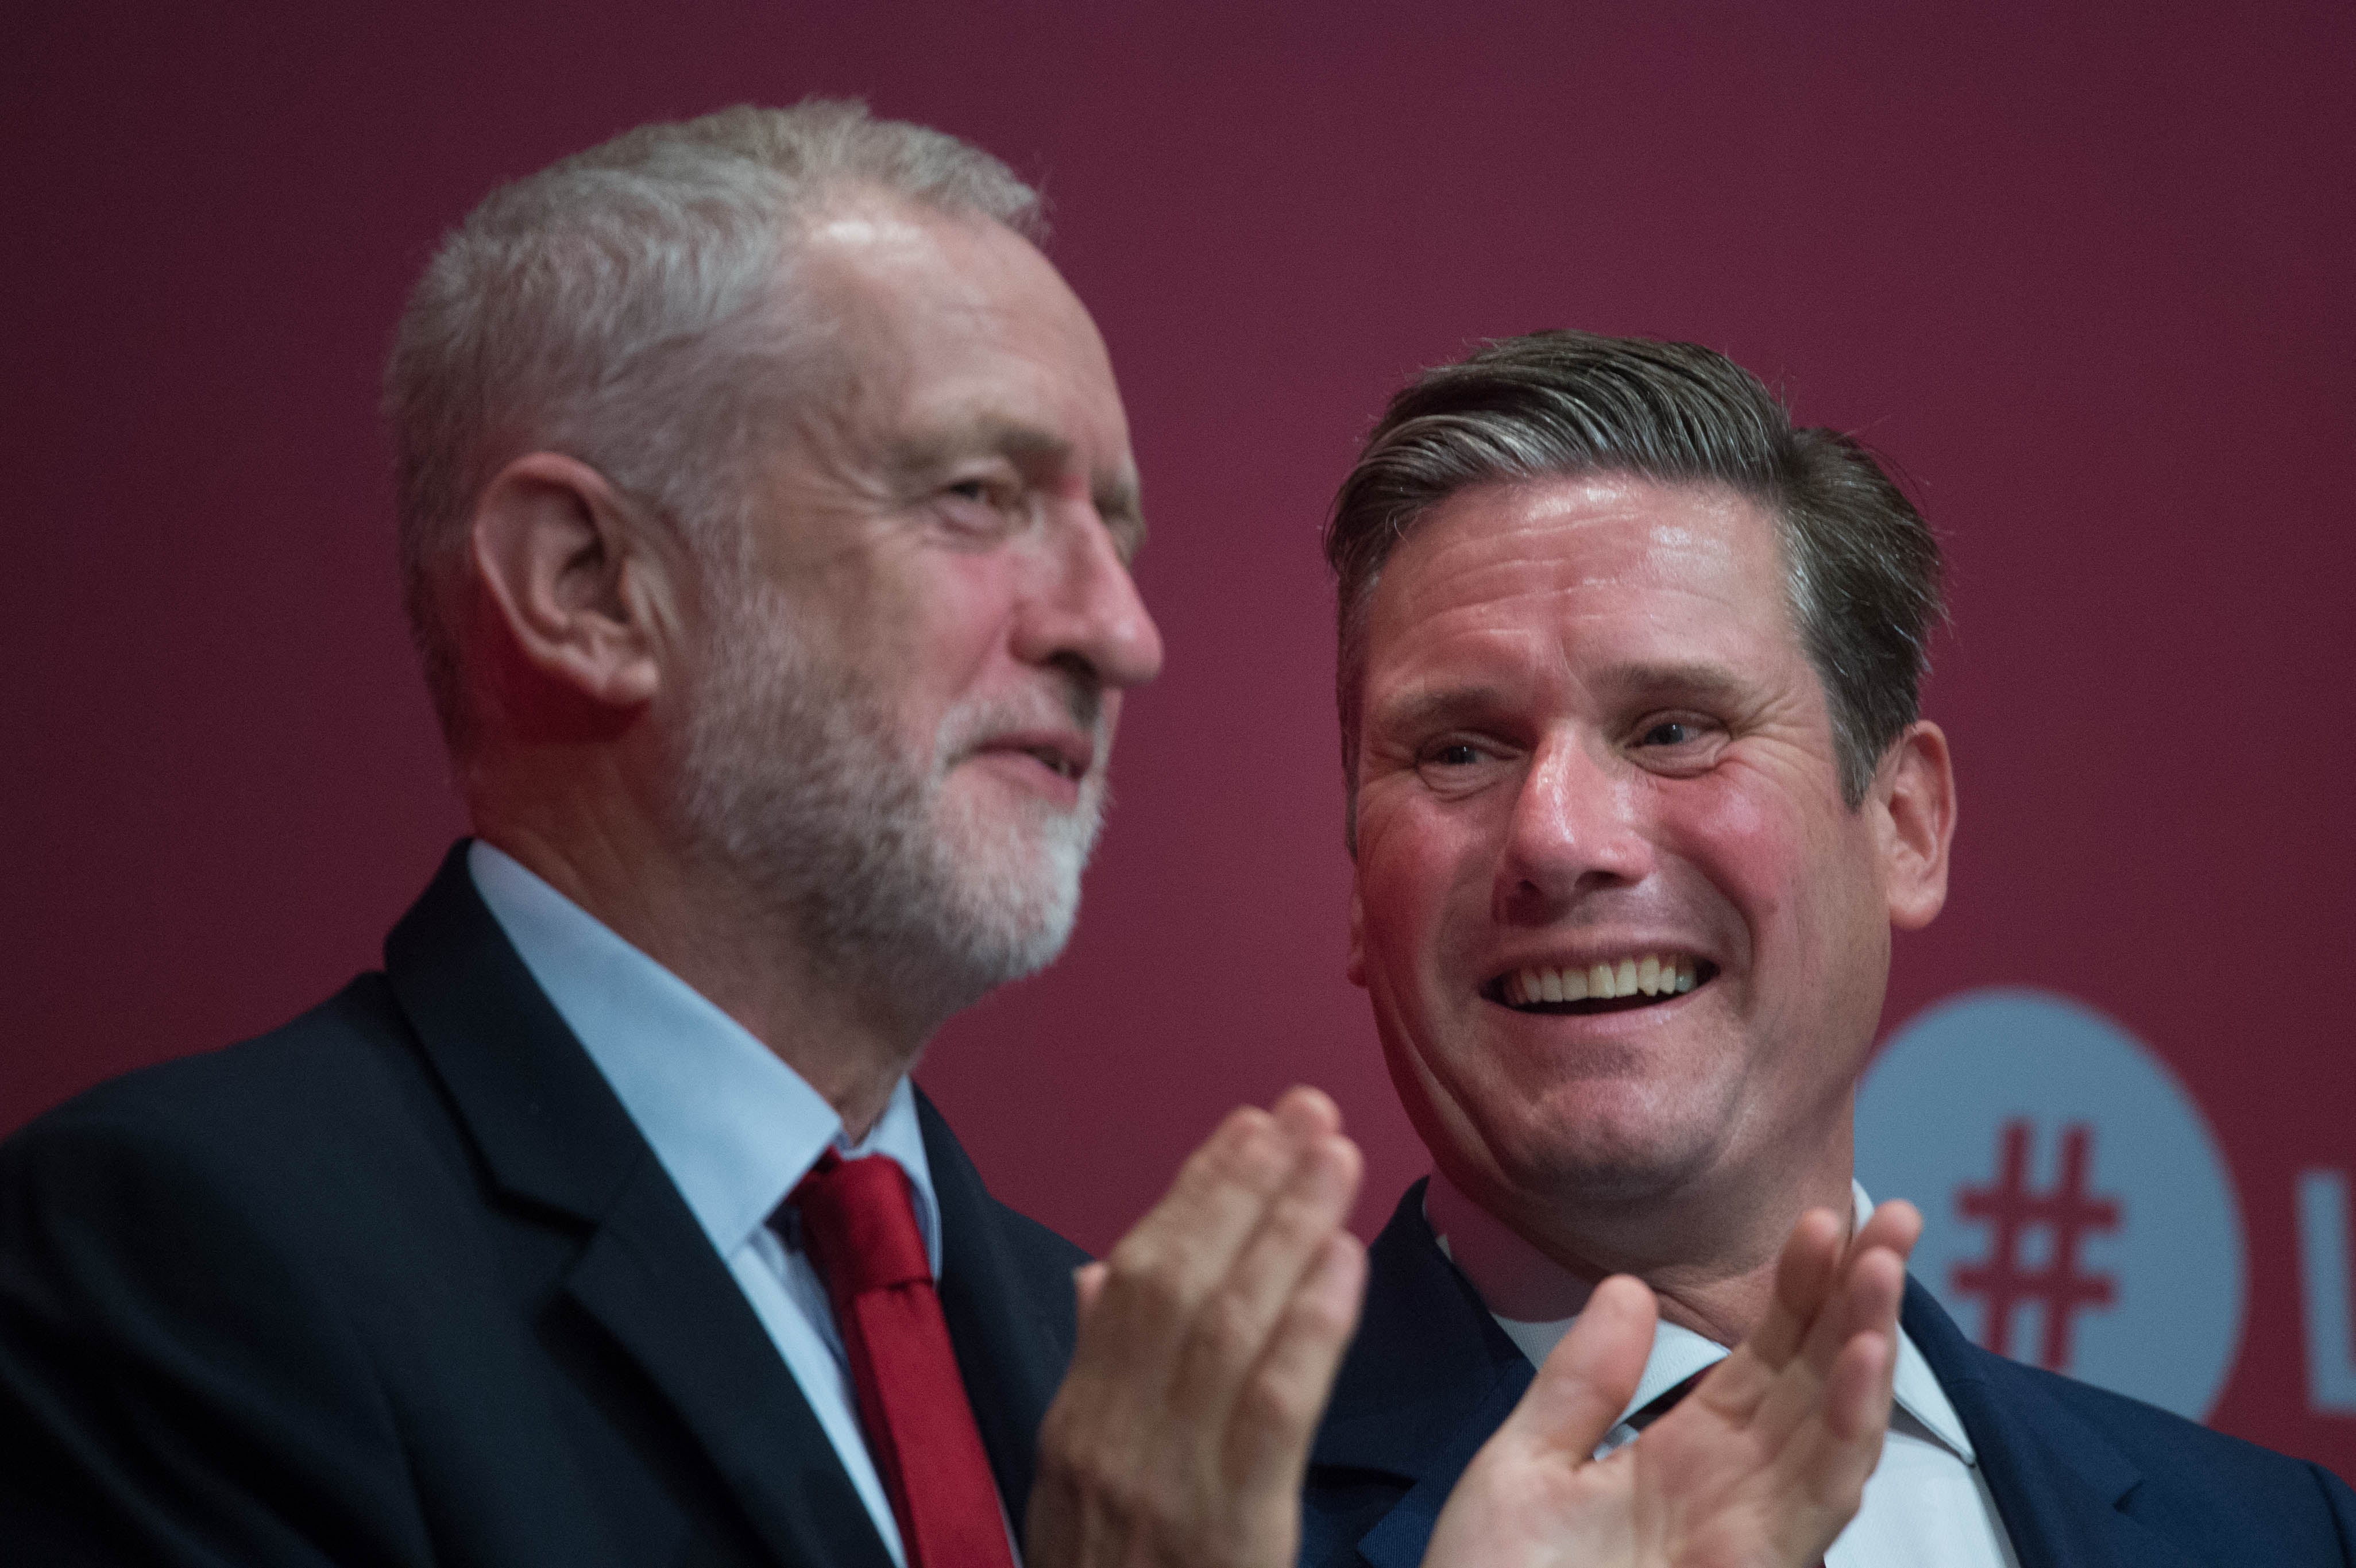 Corbyn stepped down in 2019 with Sir Keir Starmer taking his place